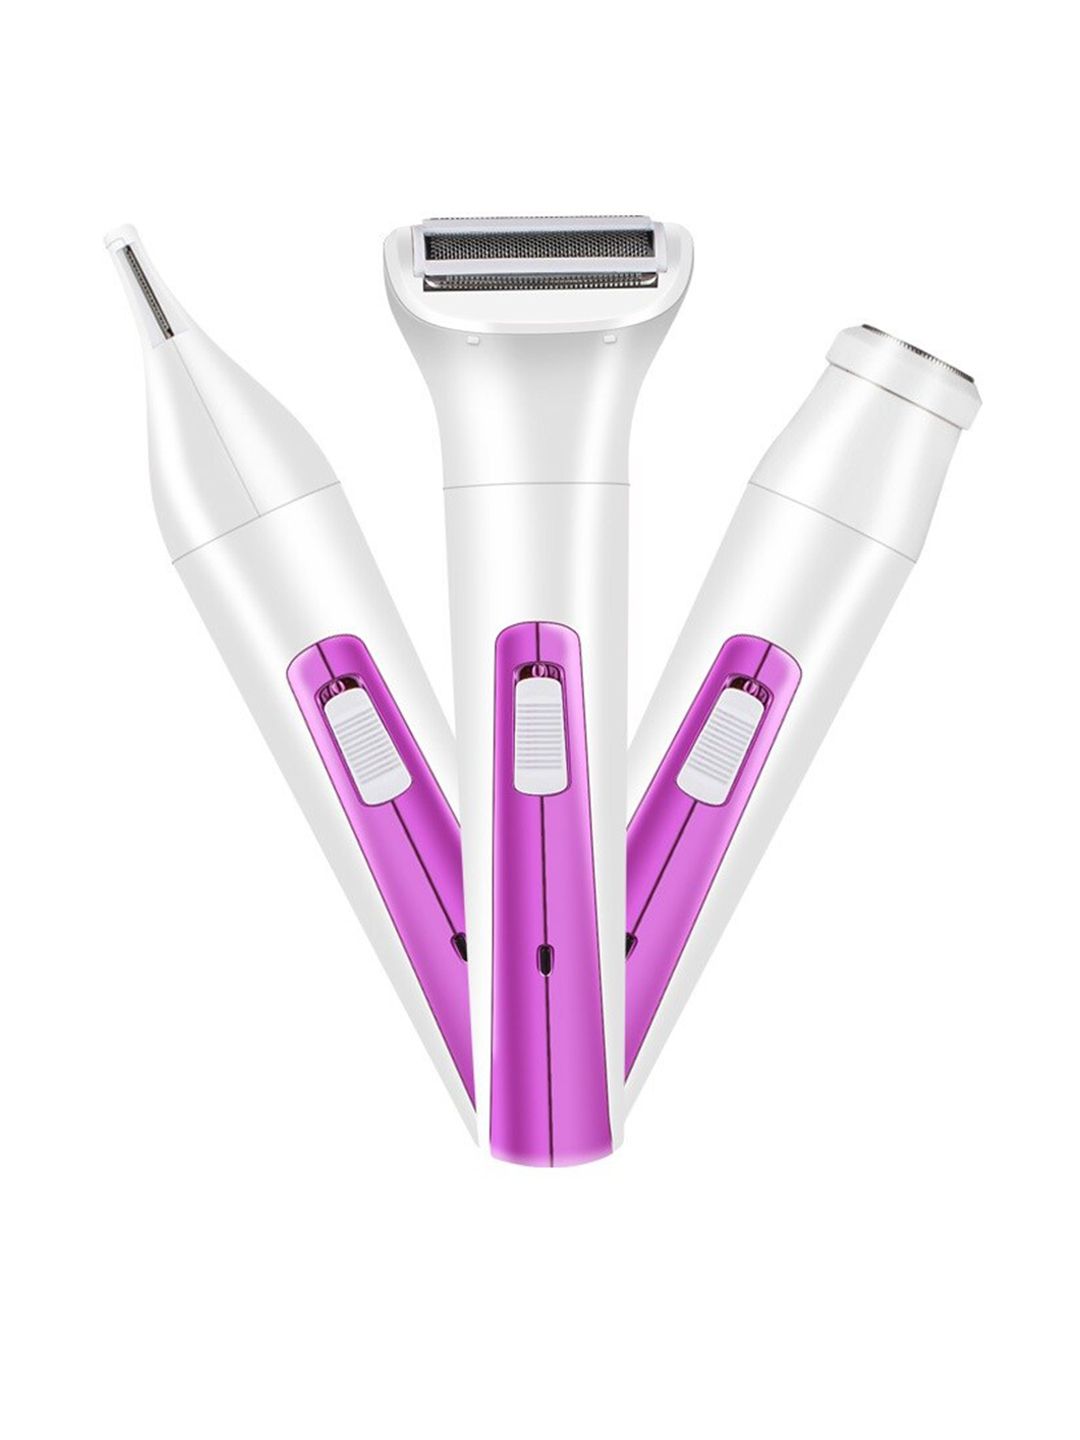 PAINLESS White & Purple 3 in 1 USB Body Hair Remover Price in India